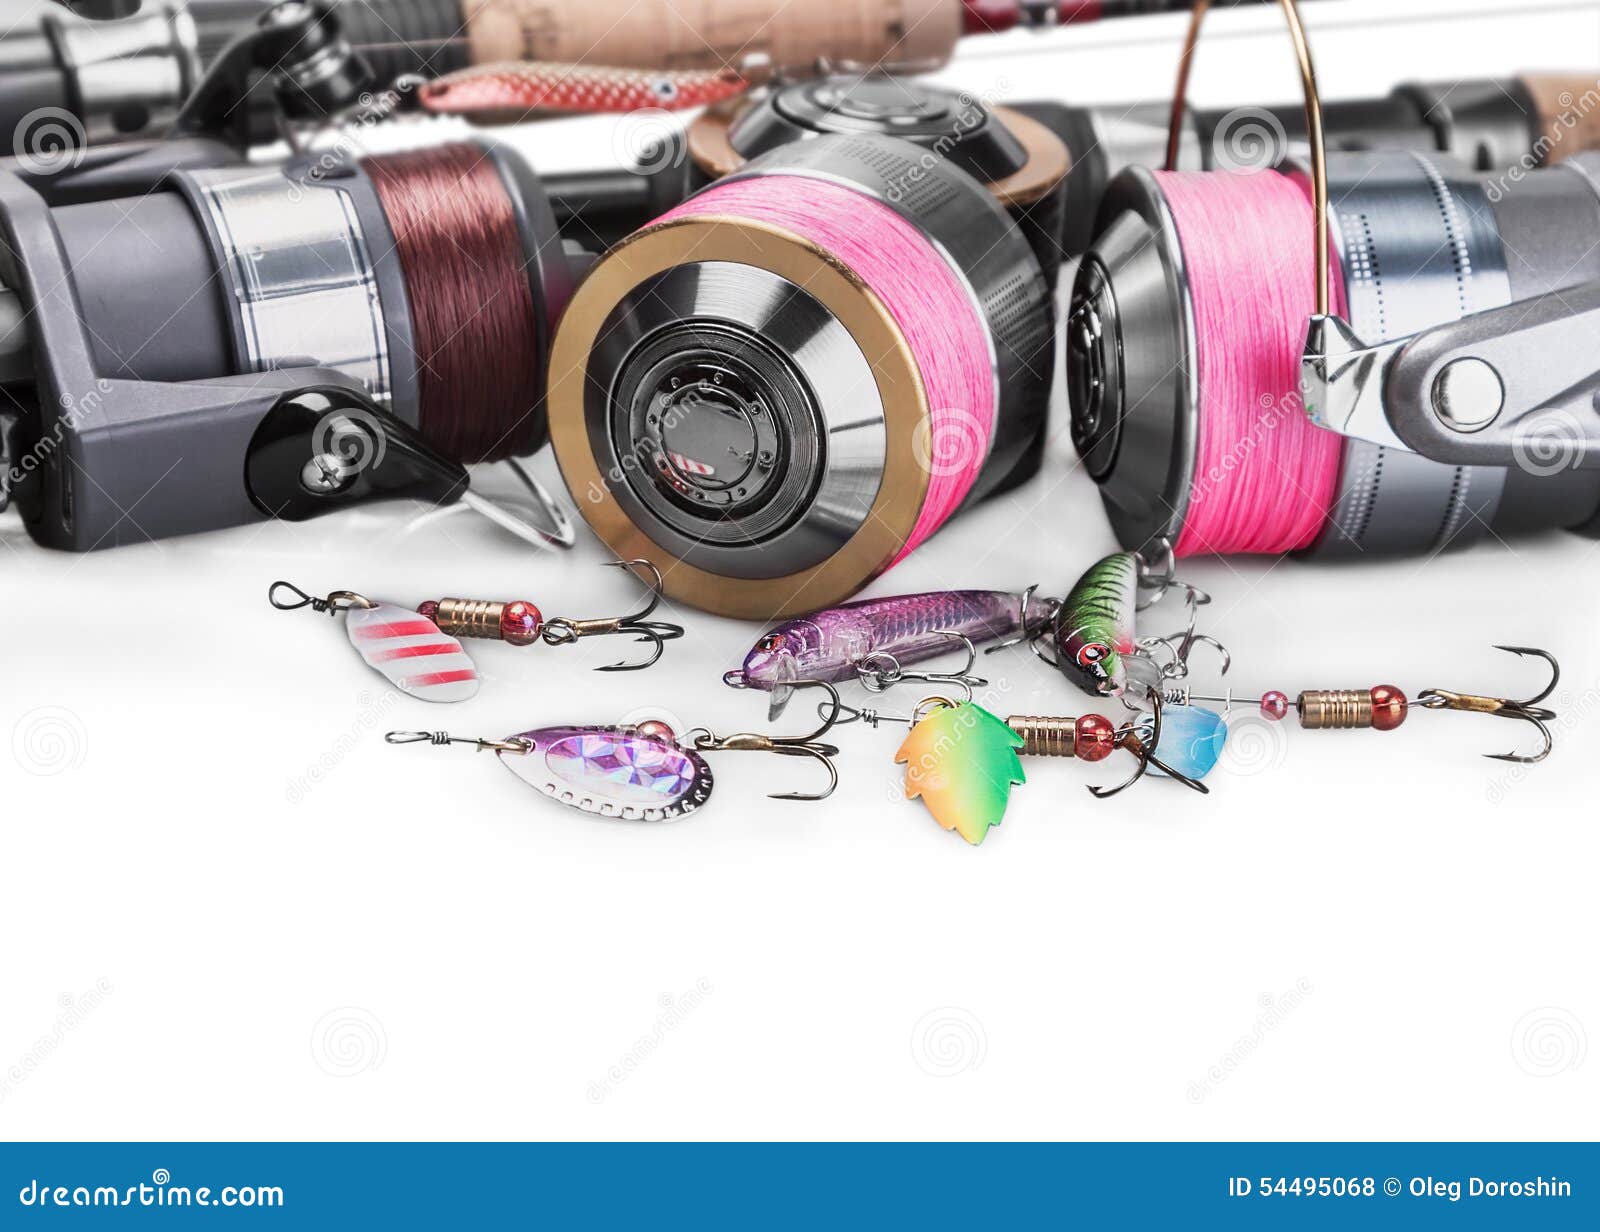 https://thumbs.dreamstime.com/z/fishing-tackle-spinning-isolated-whit-white-background-focus-reel-pink-braided-line-lures-convent-54495068.jpg